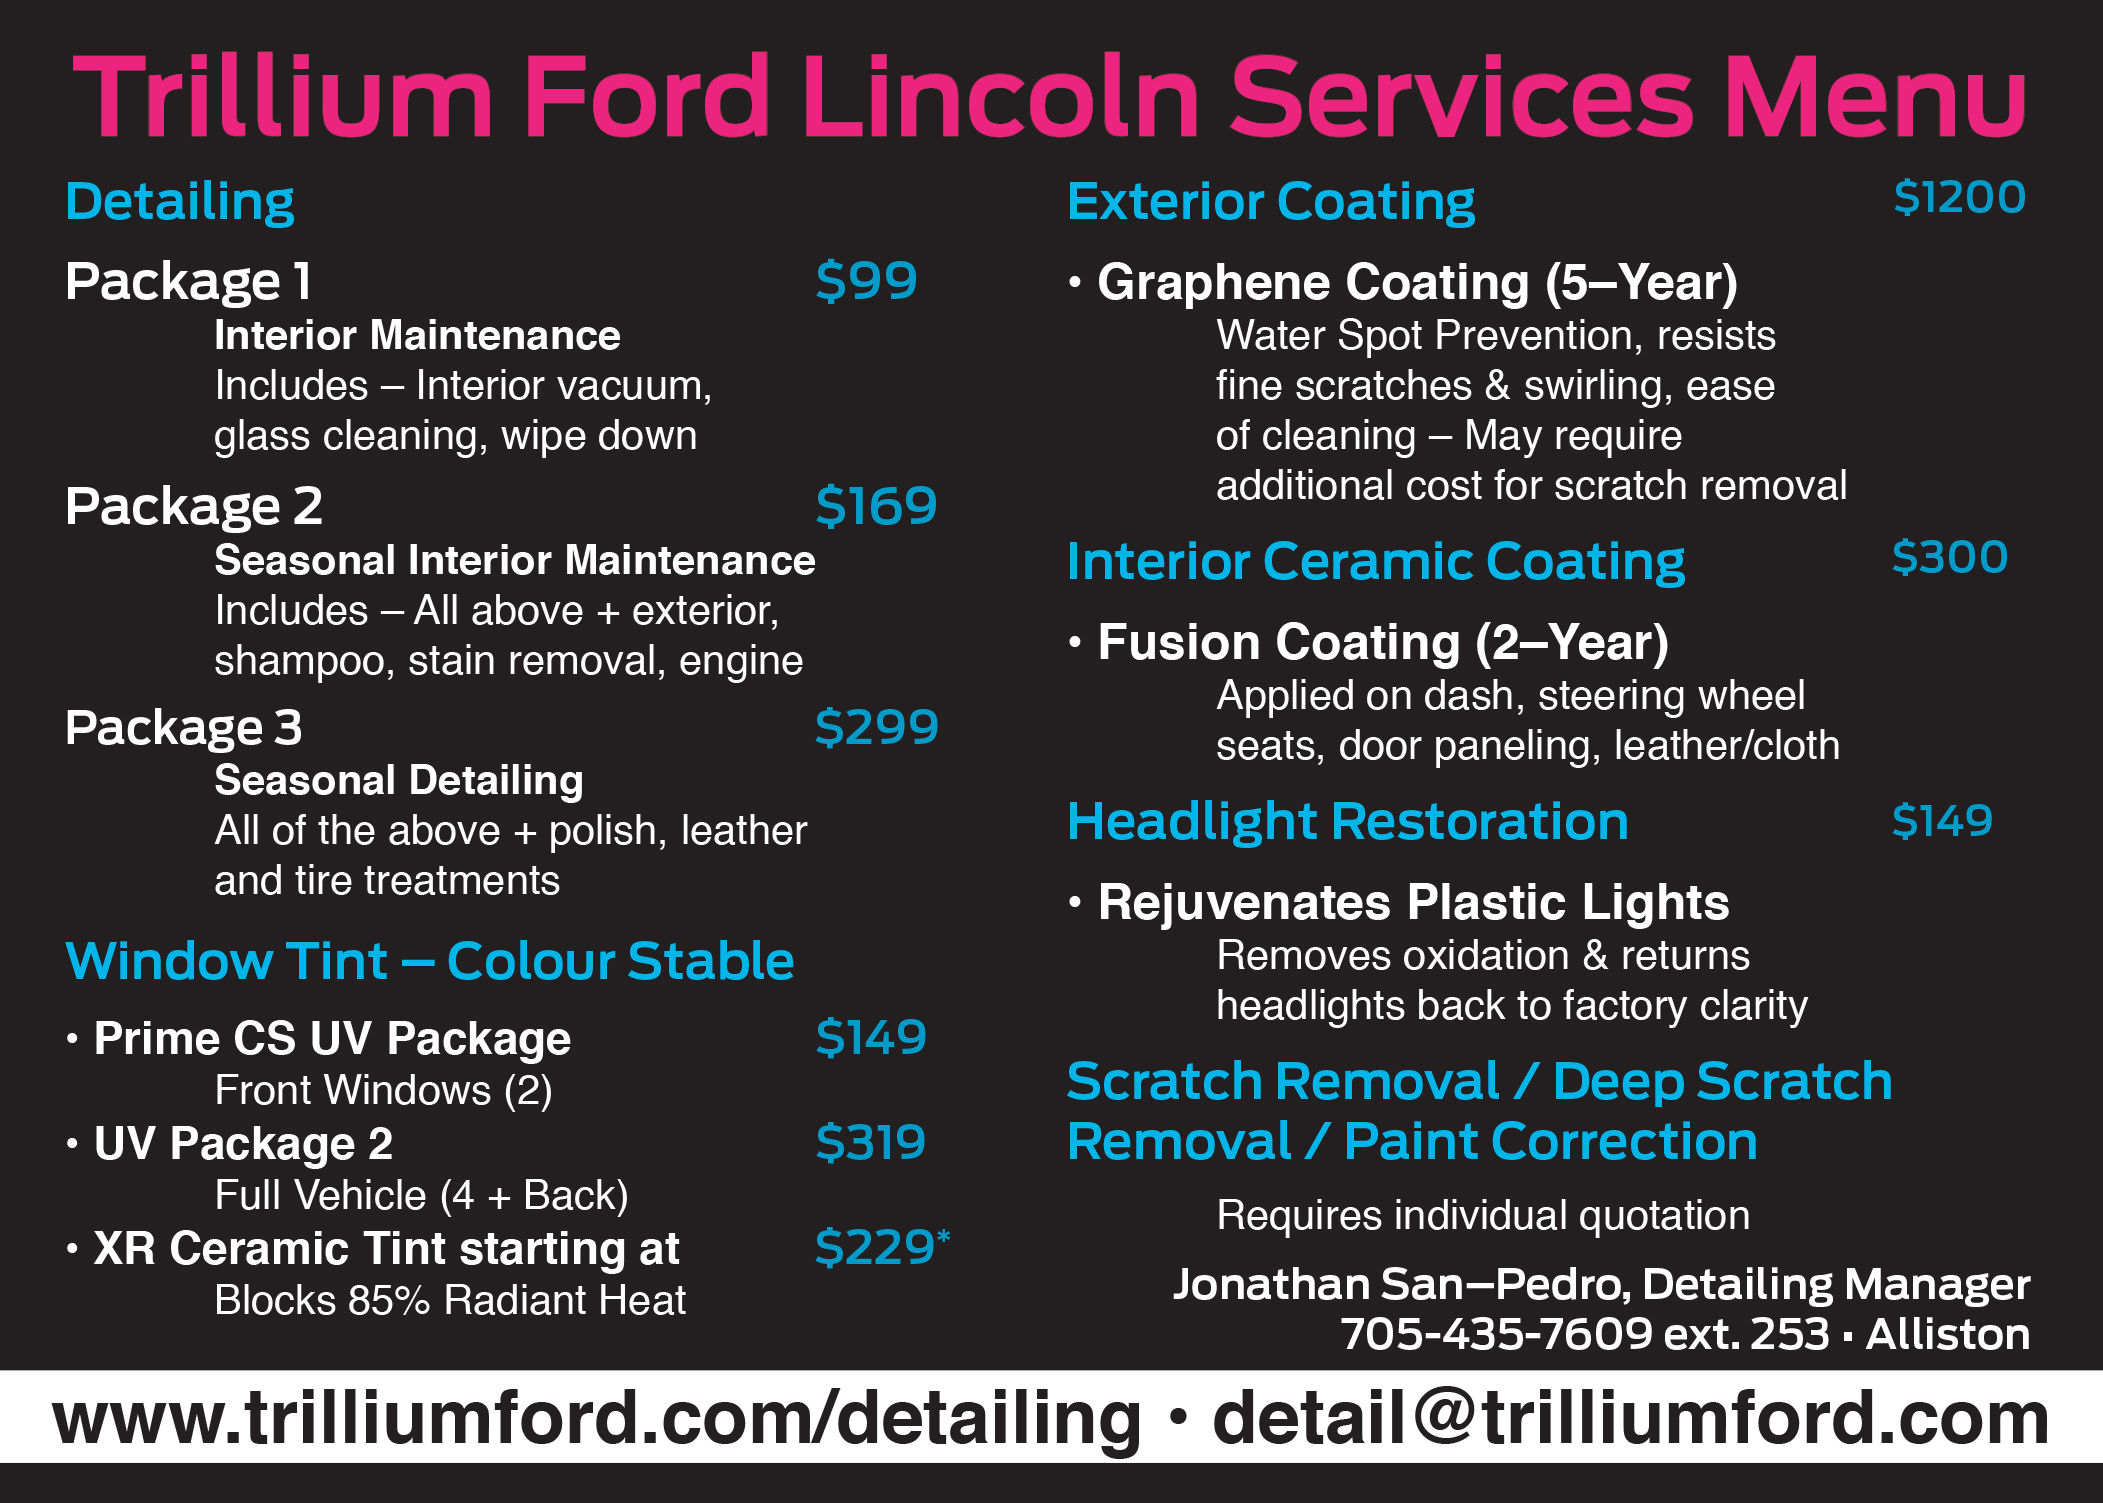 New Services at the Detailing Department in Alliston